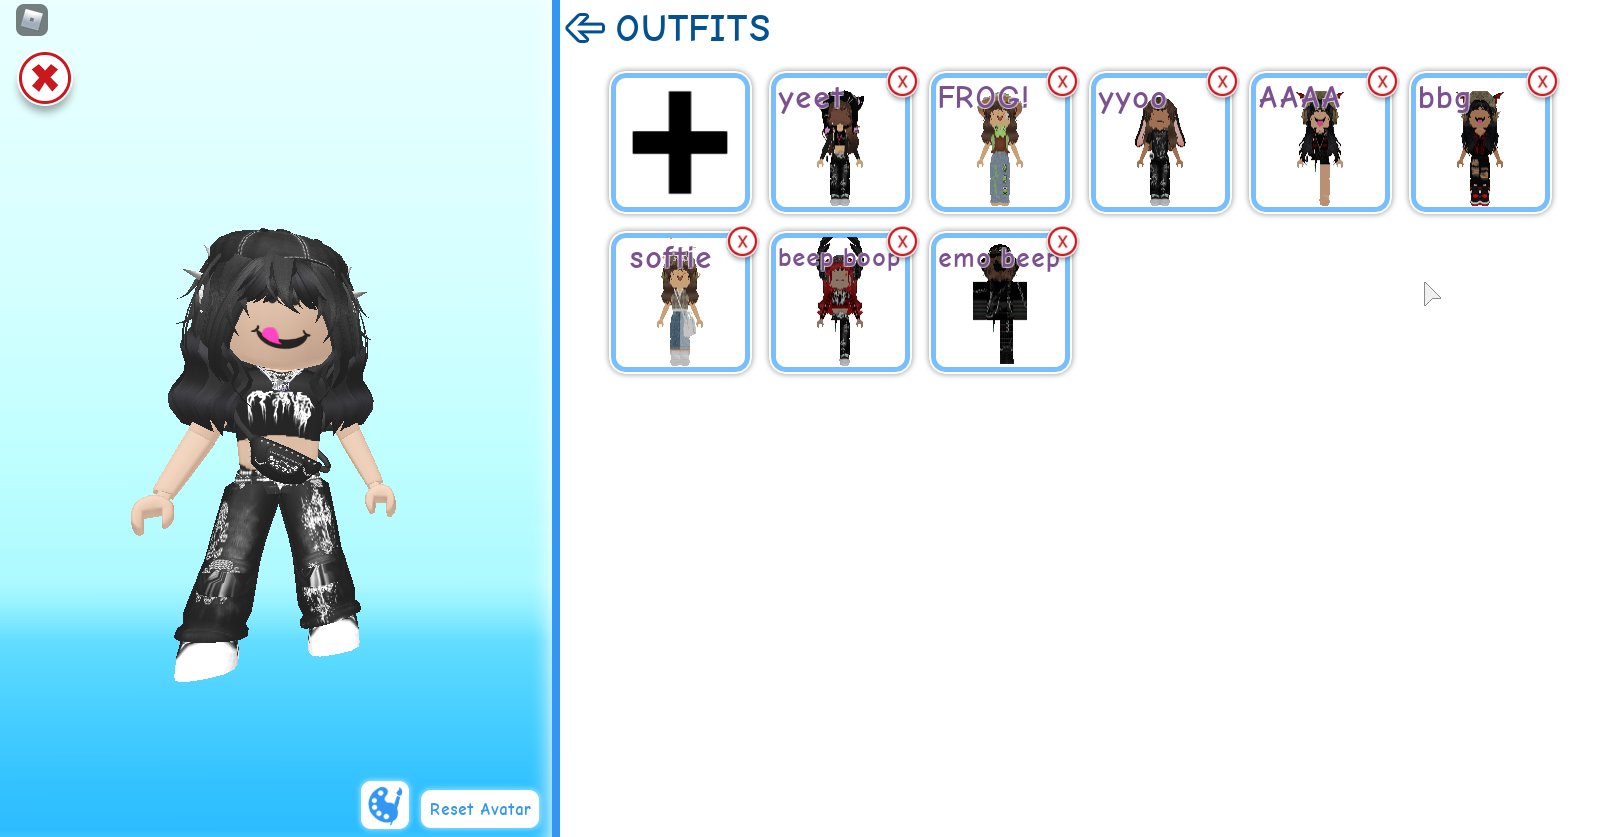 𝒹 𝓇 𝑒 𝒶 𝓂 𝒾 𝓃 𝑔 On Twitter Roblox Me In Meep City Making My Dream Outfits Be Like Https T Co Nzvpdbj7h1 Twitter - roblox meep city outfits